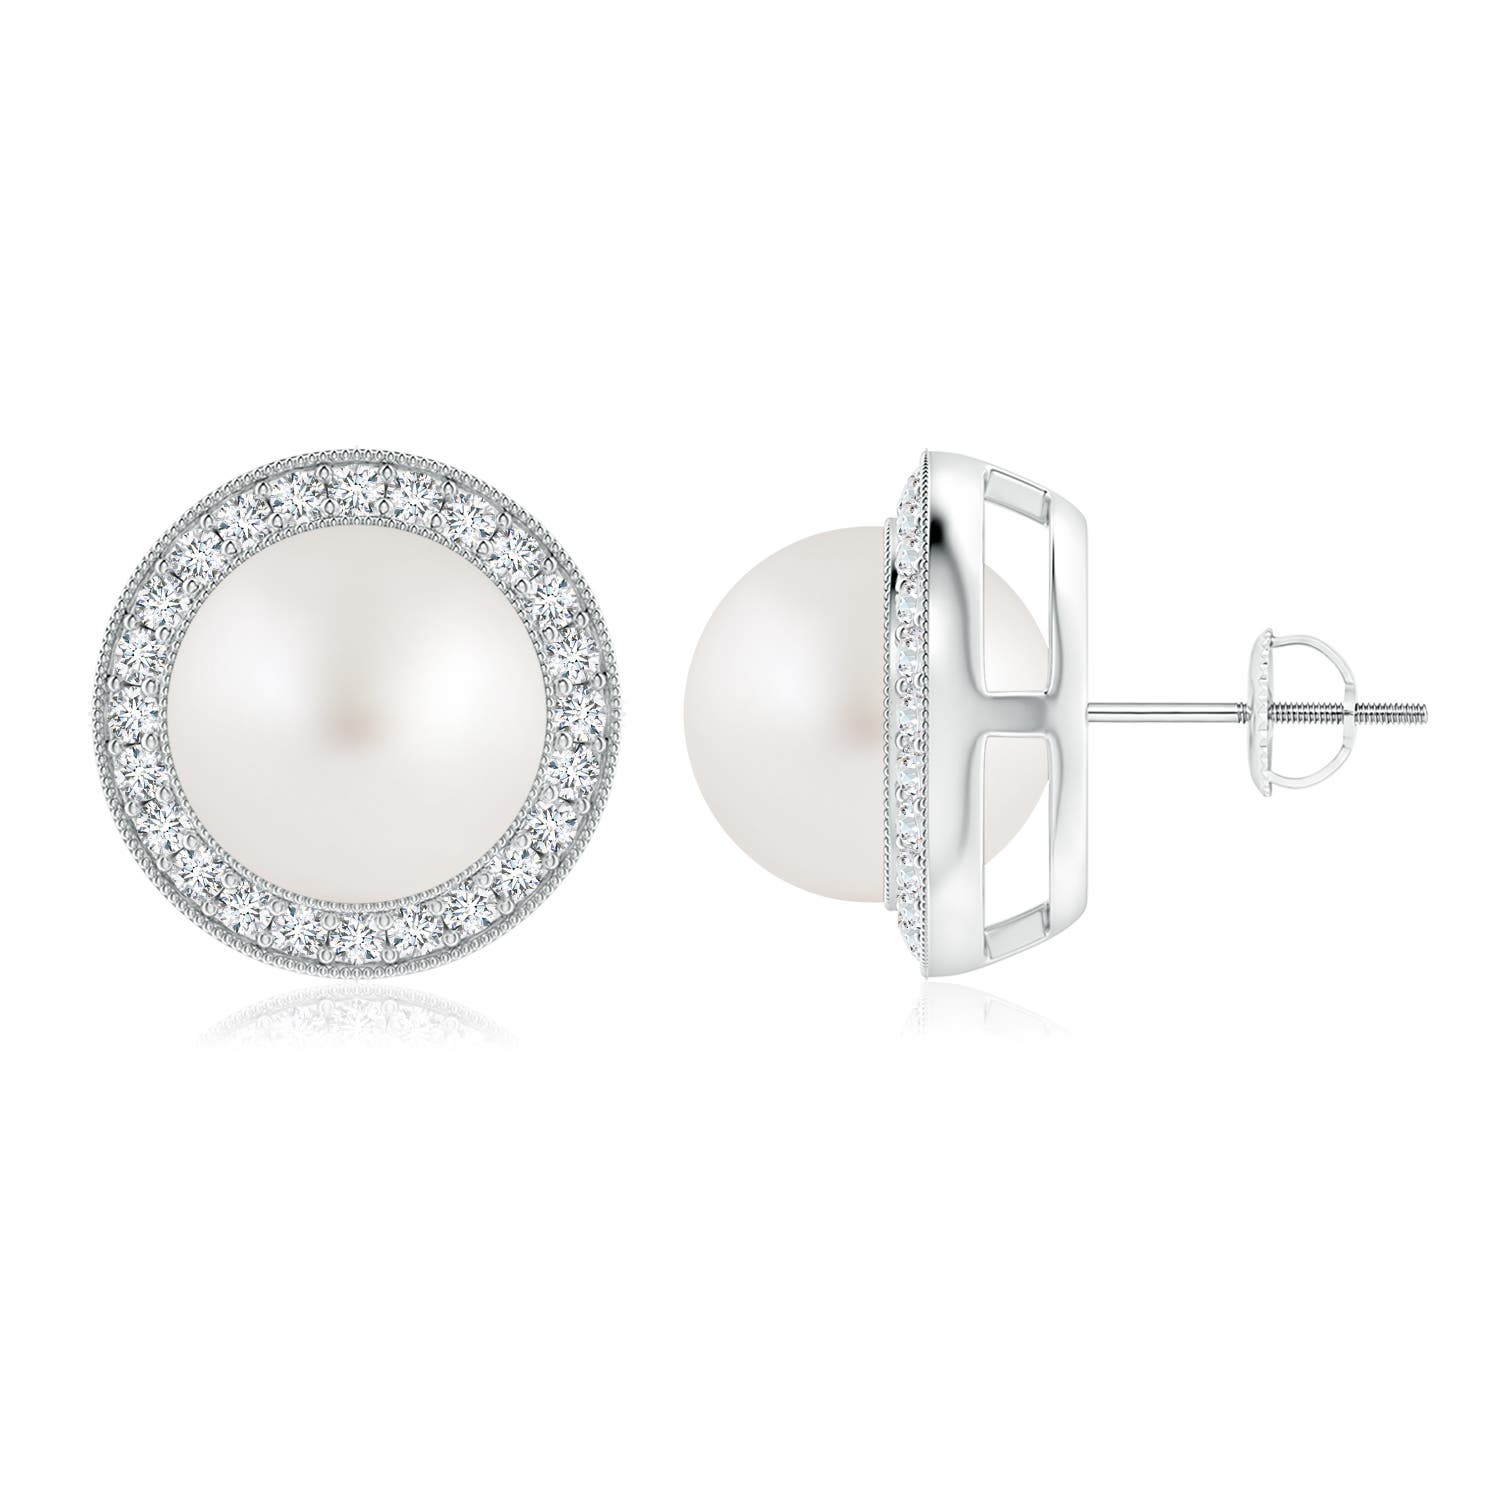 AA - South Sea Cultured Pearl / 15.07 CT / 14 KT White Gold